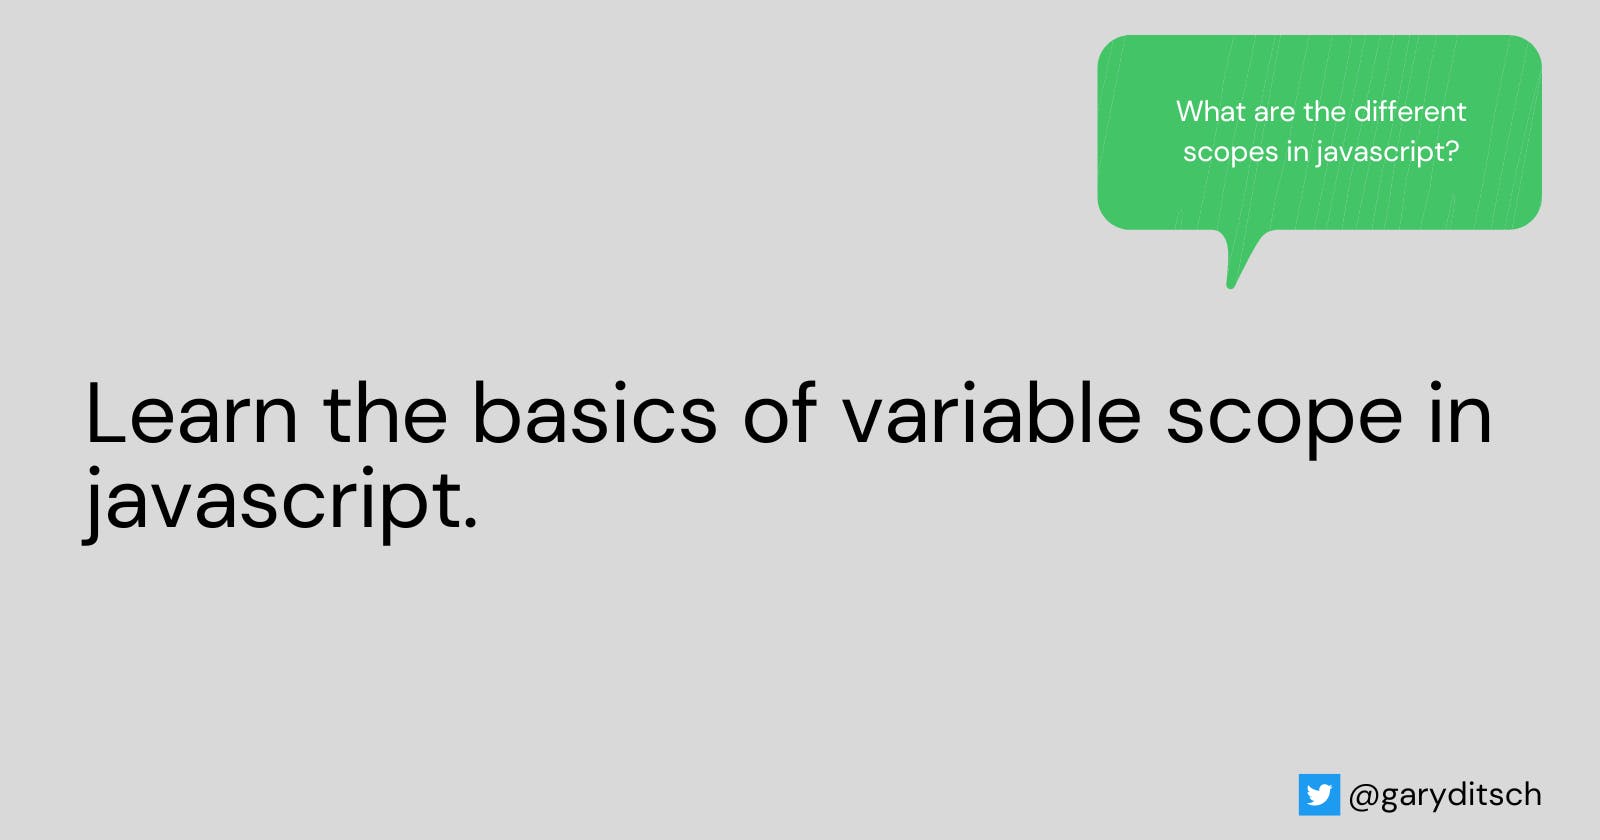 Learn the basics of variable scope in javascript